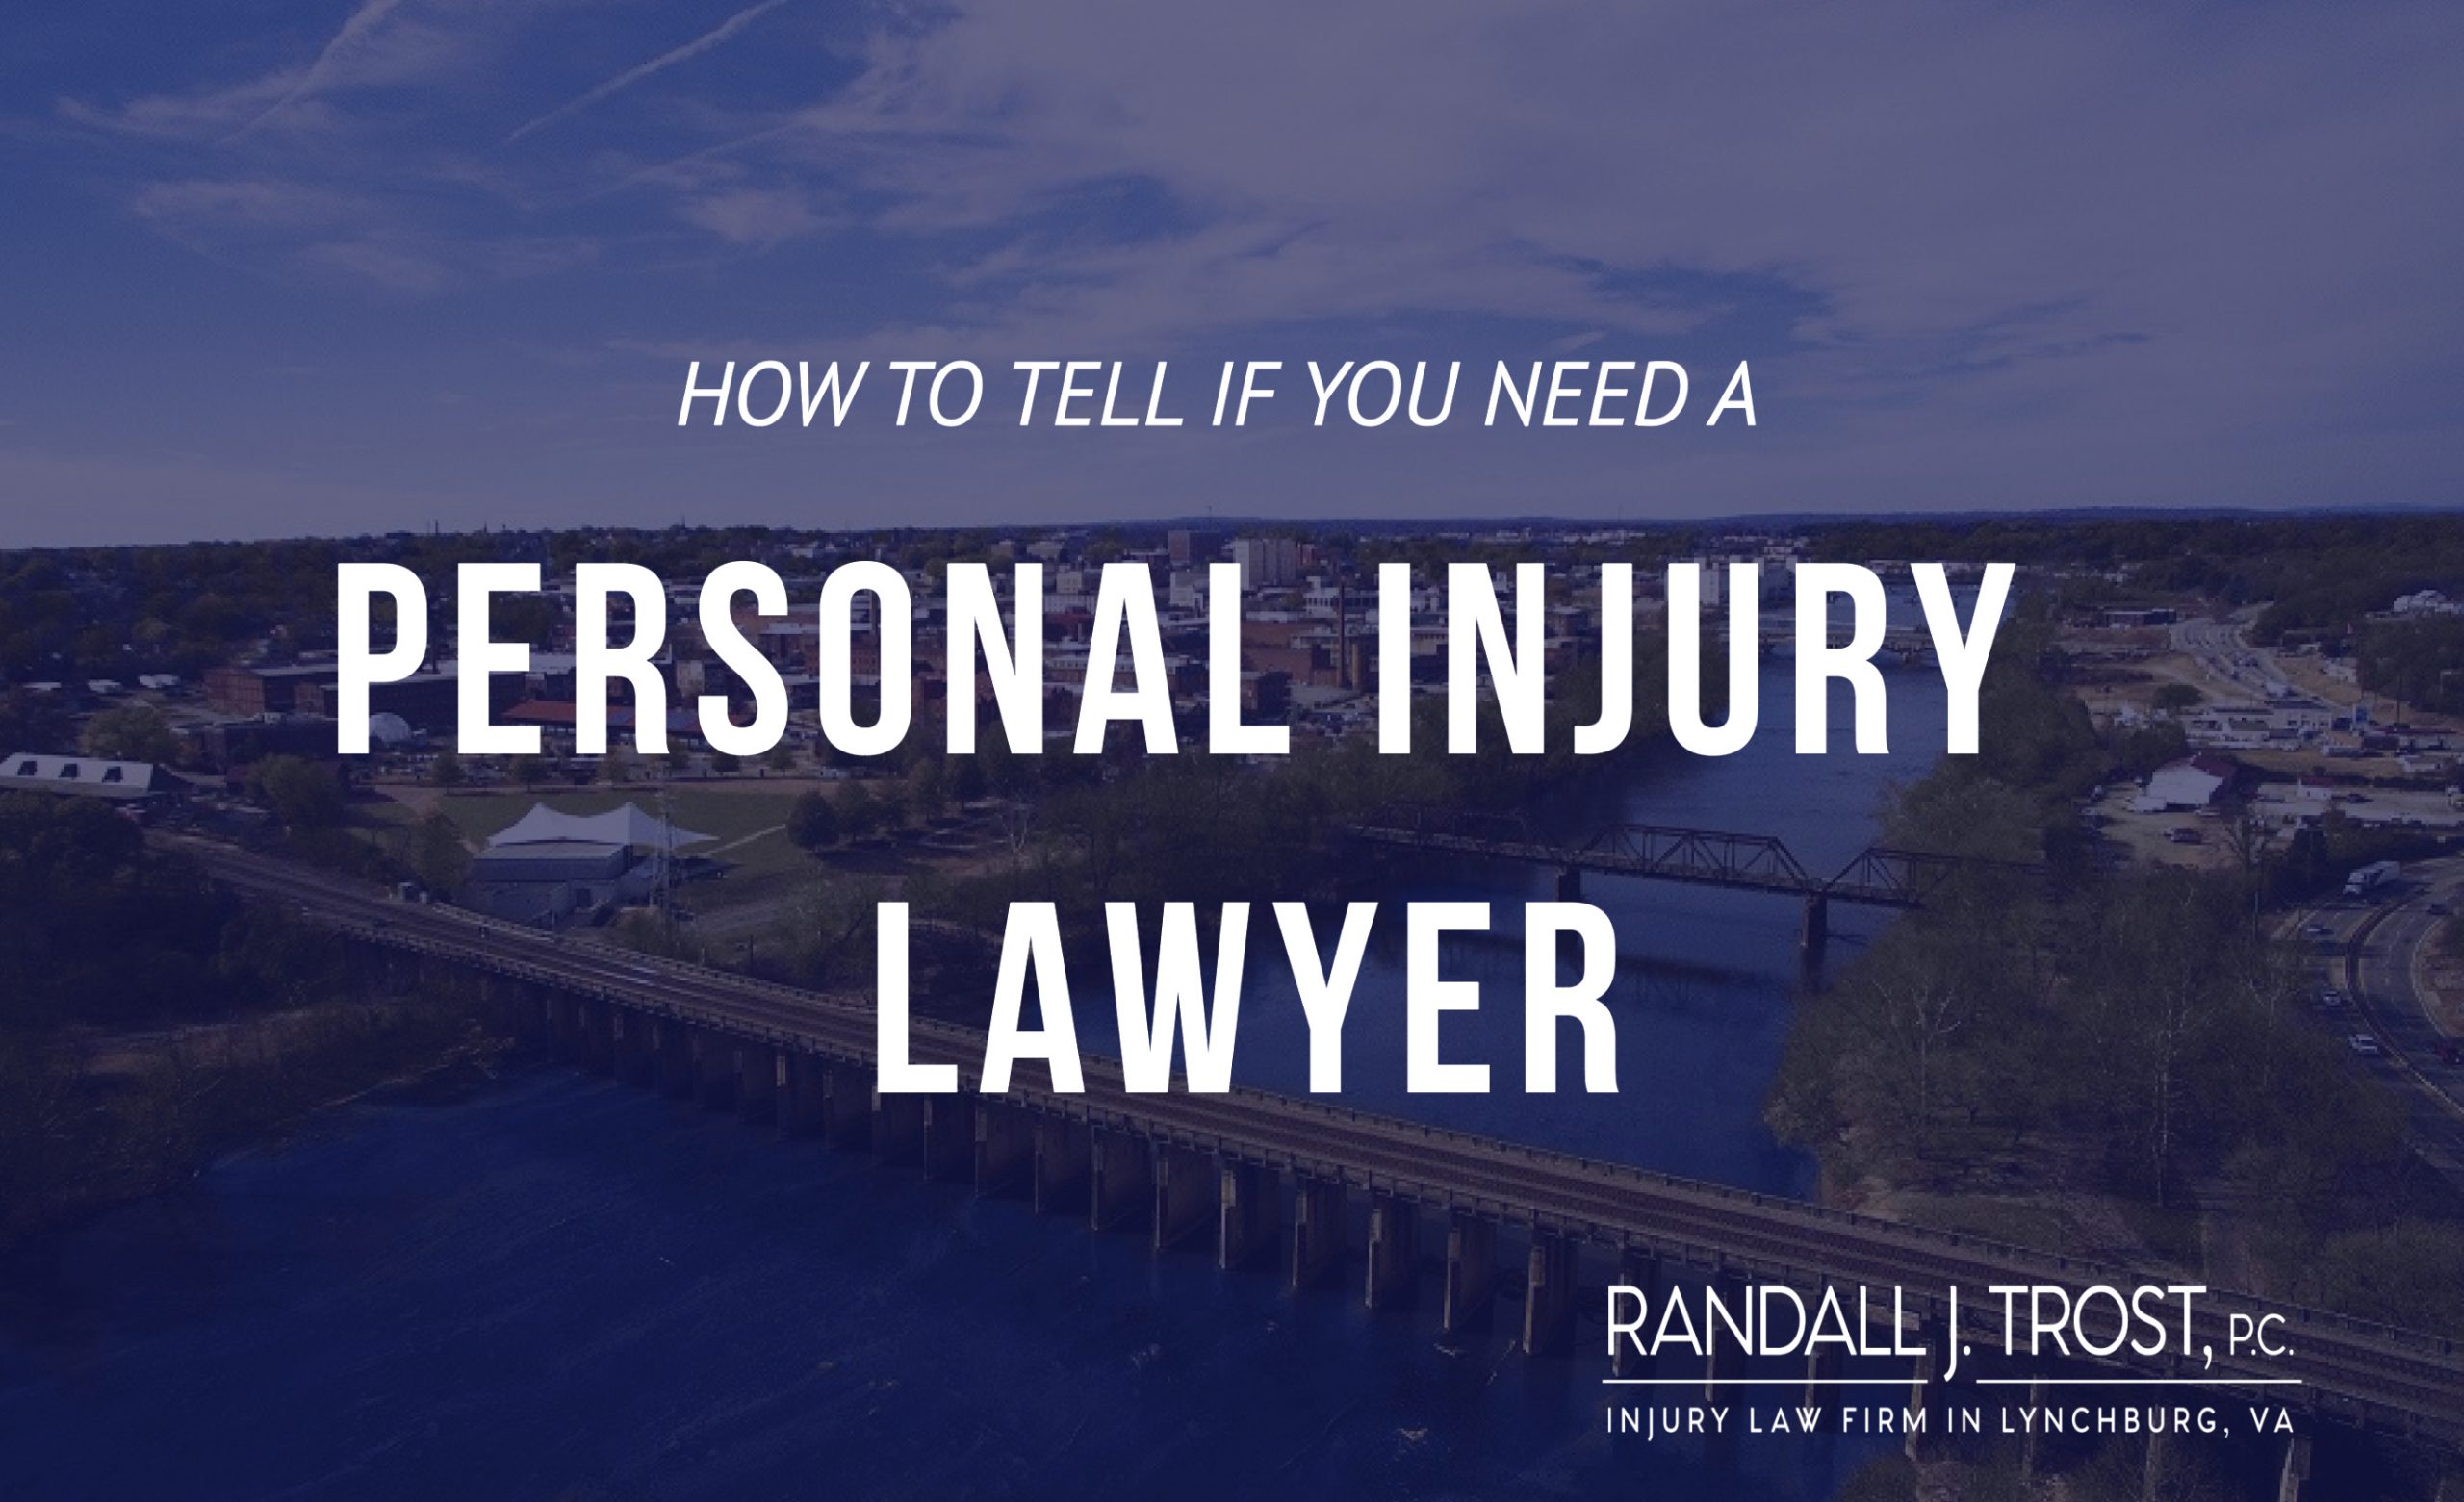 Personal Injury Lawyer Danville Va Dans Personal Injury Claim Explained by Randall J Trost P C